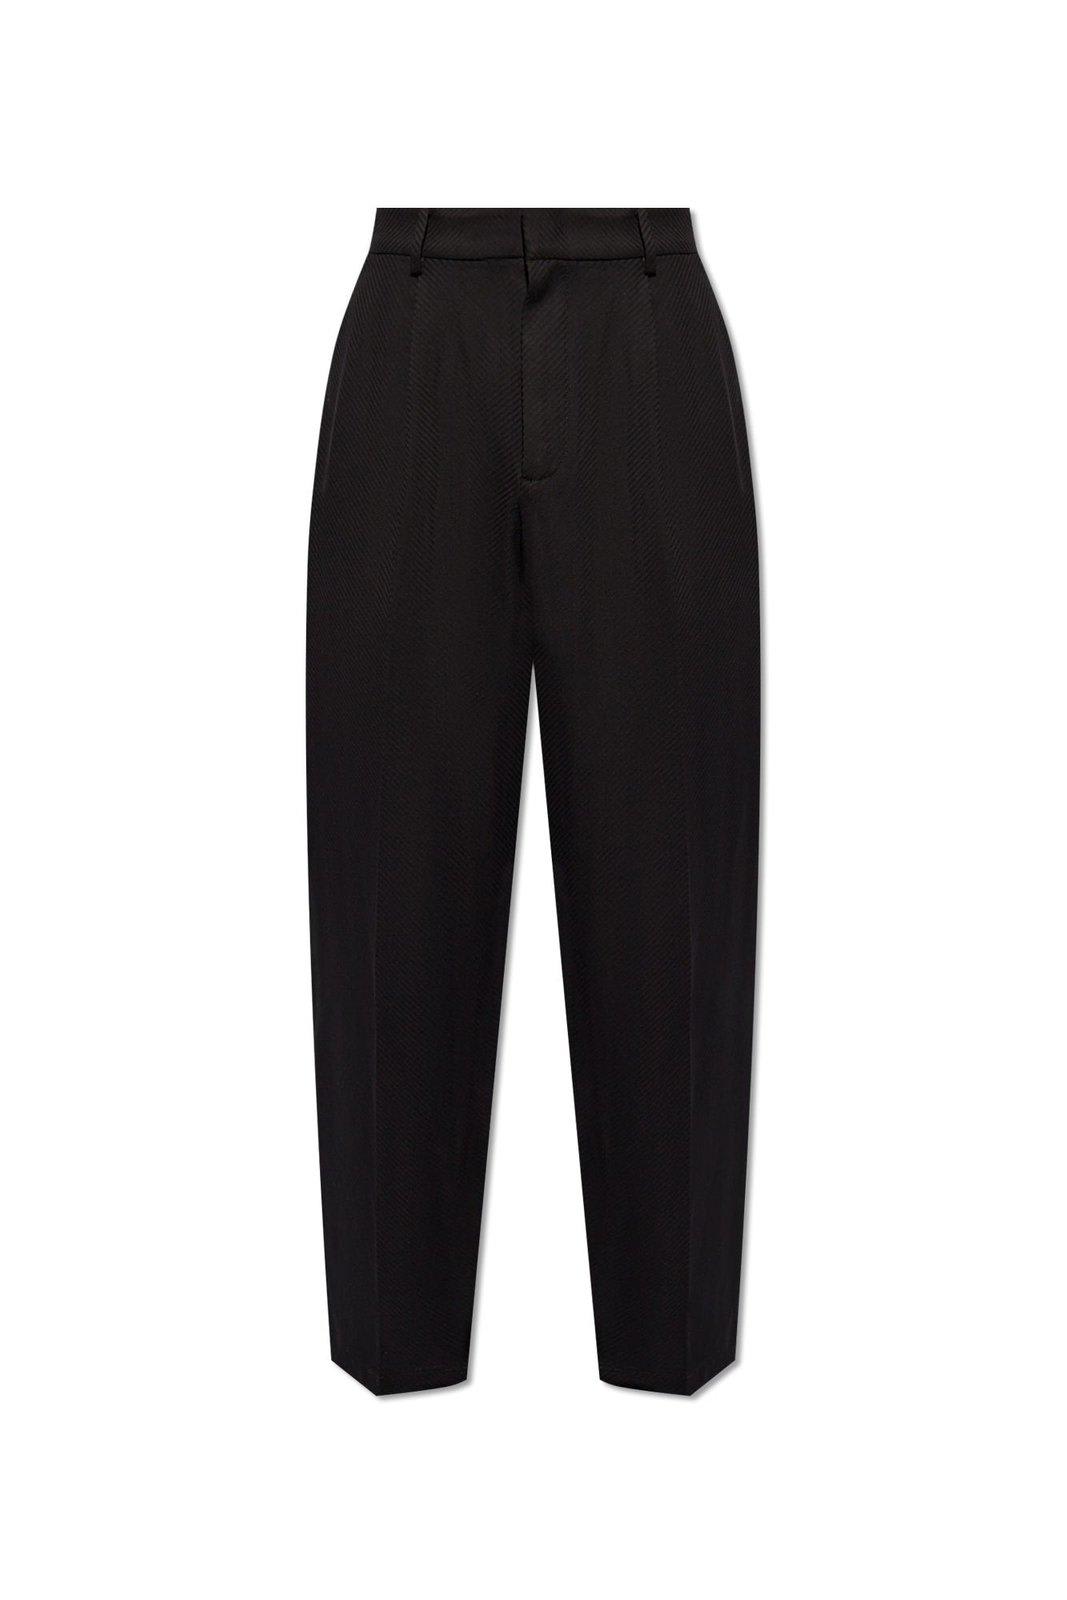 Shop Emporio Armani Trousers With Tapered Legs